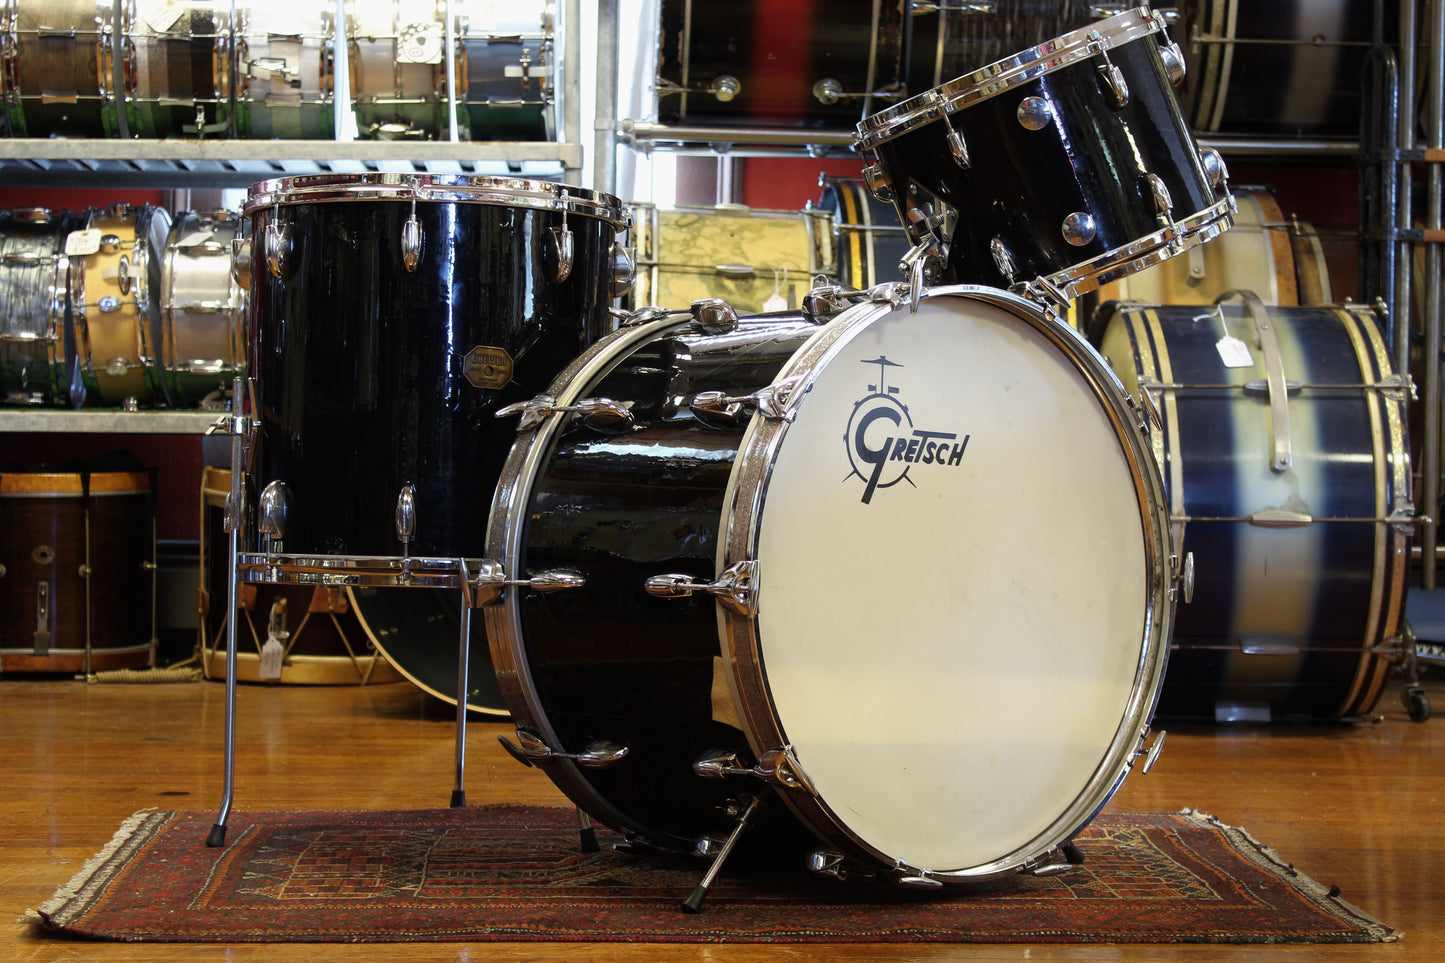 1970's Gretsch Name Band Outfit in Jet Black Nitron 14x22 16x16 9x13